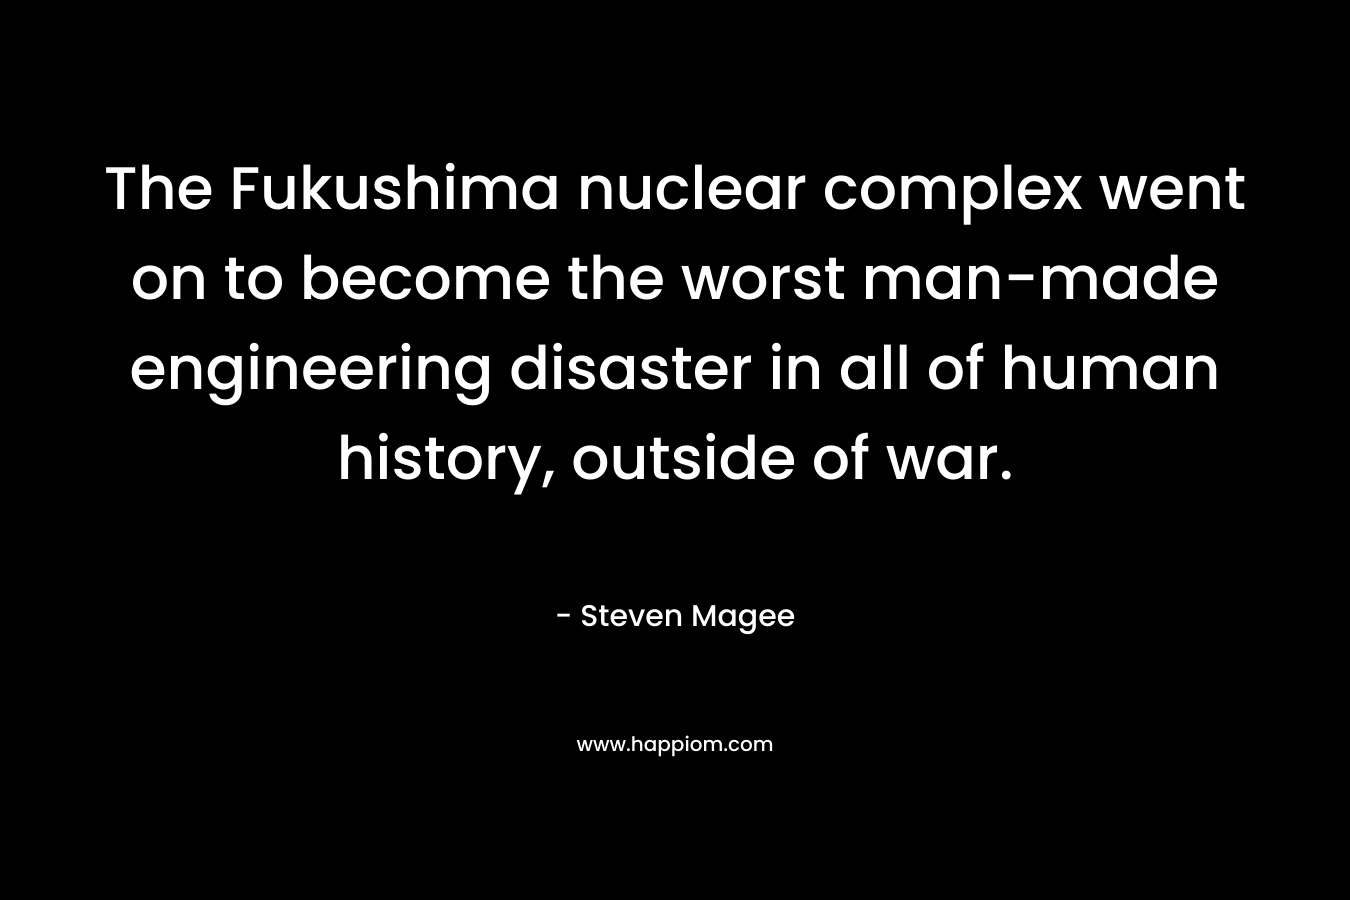 The Fukushima nuclear complex went on to become the worst man-made engineering disaster in all of human history, outside of war.